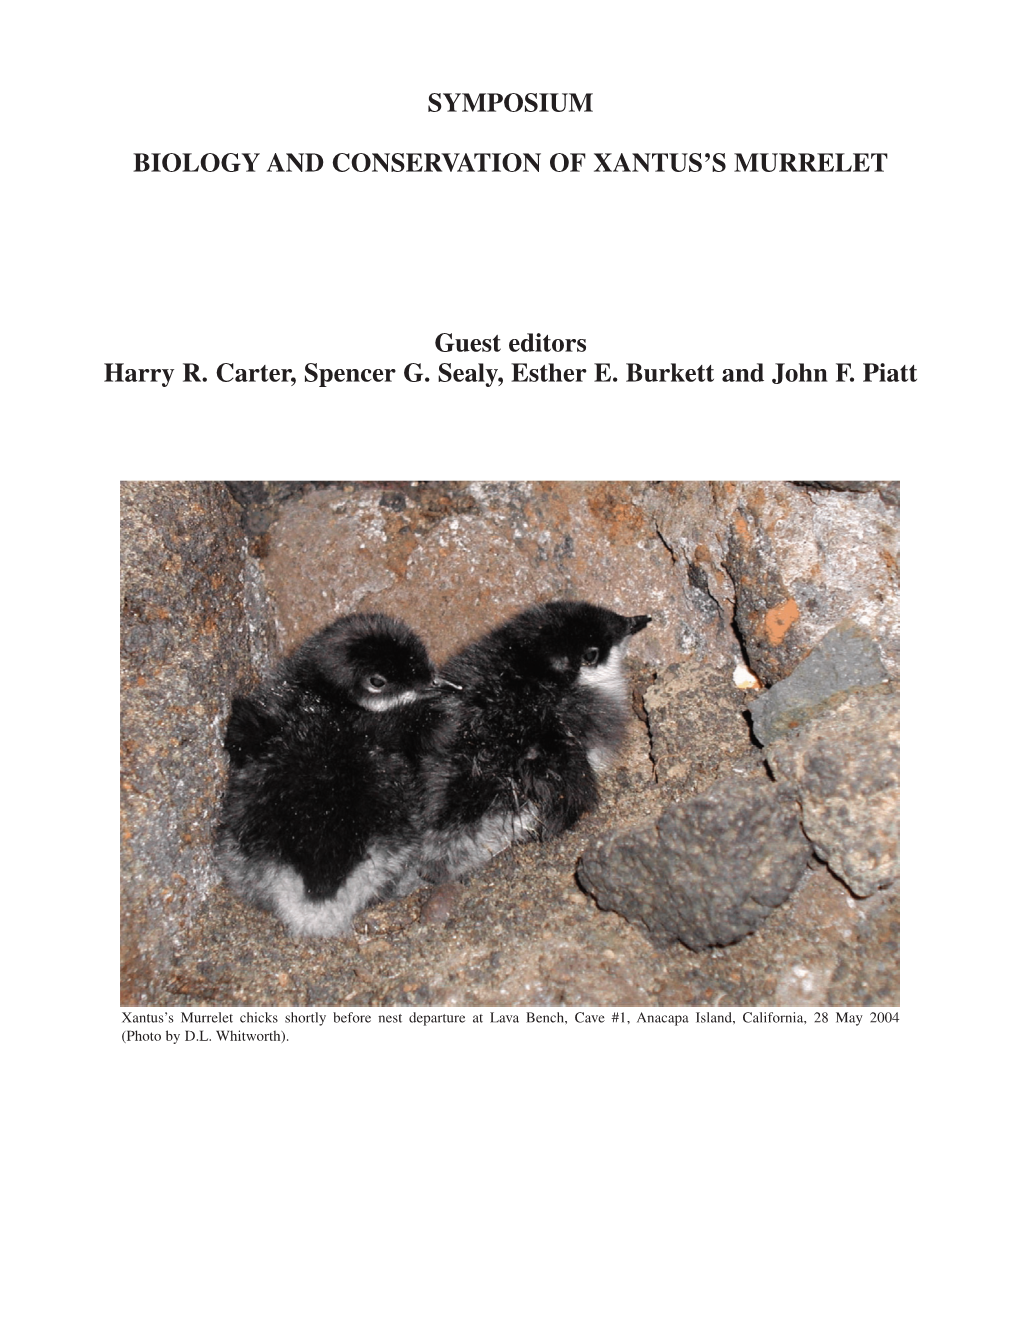 Biology and Conservation of Xantus's Murrelet